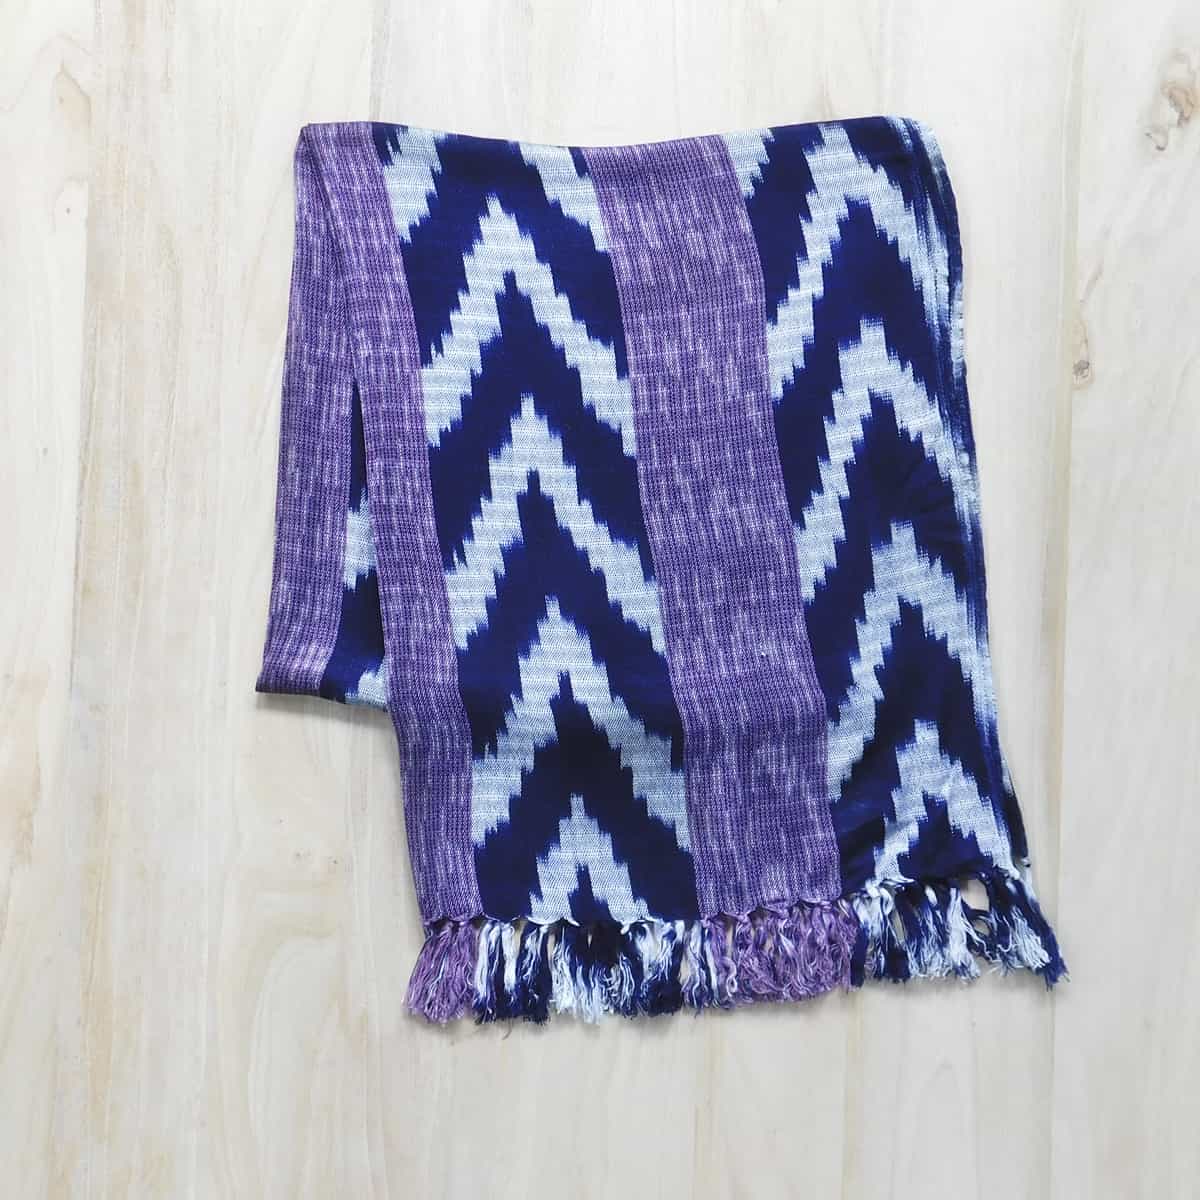 handwoven scarf in navy blue ikat and purple stripes with a decorative fringe on a light wood background